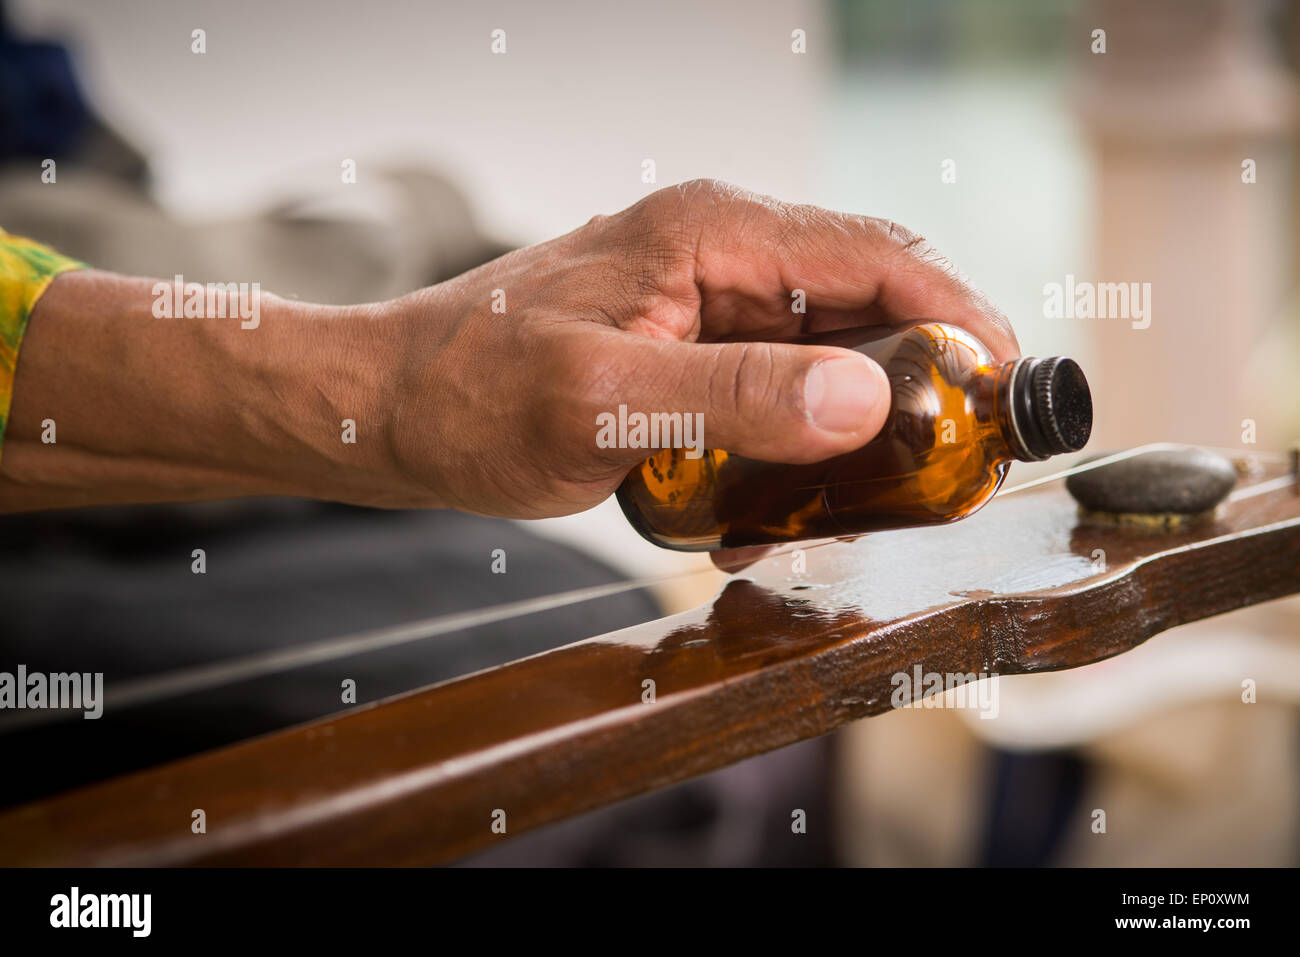 Homemade slide guitar made with wood, string and rock. A glass bottle is used for sliding on the string. Baltimore, Maryland Stock Photo